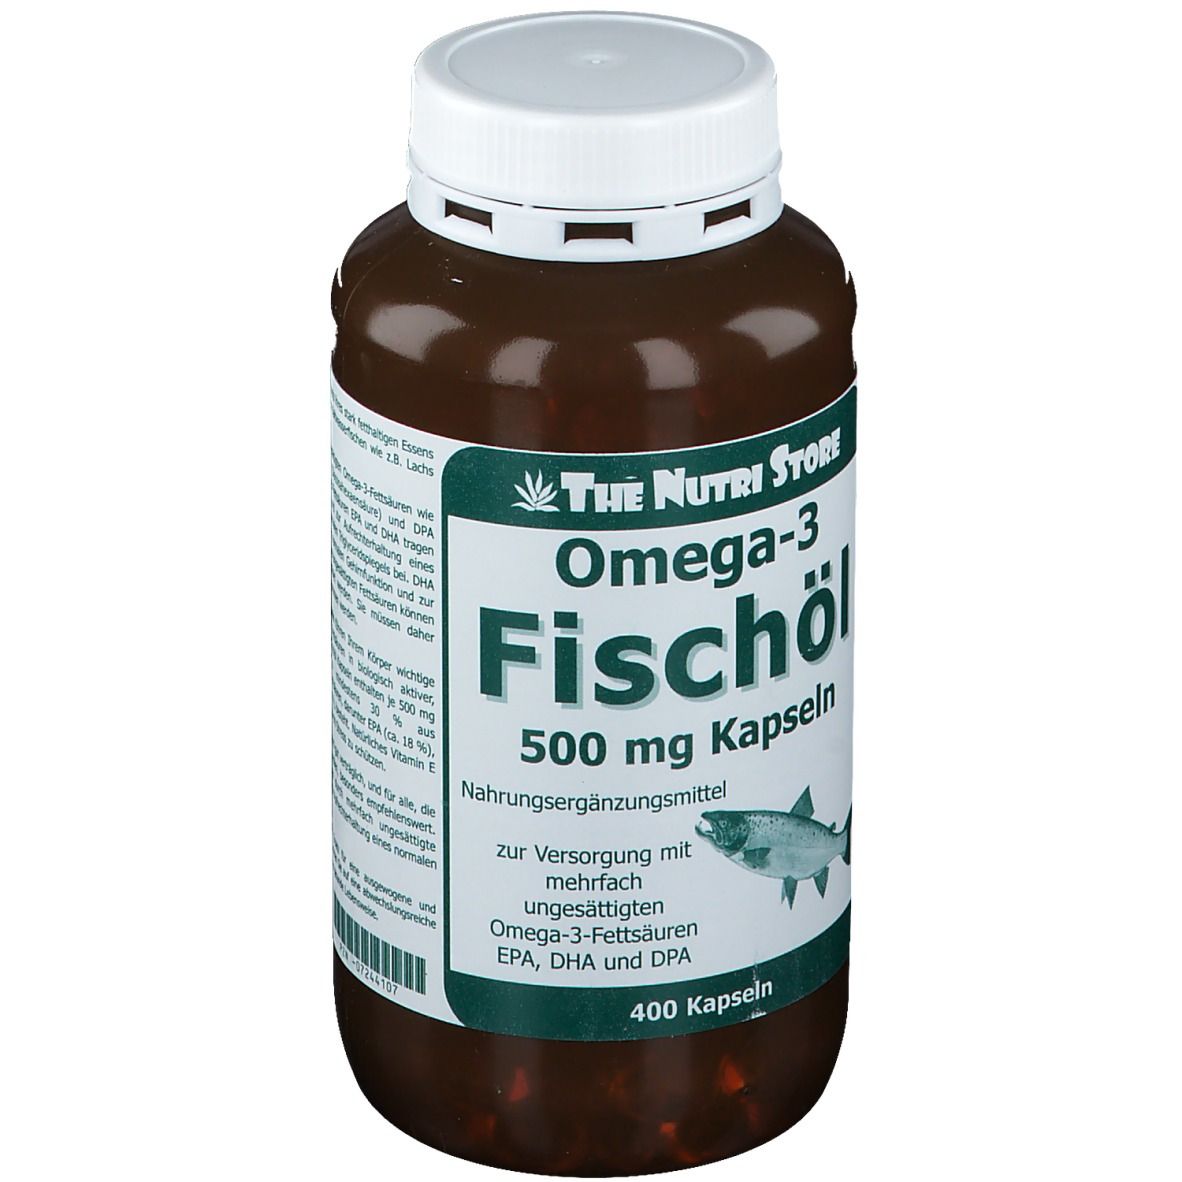 The Nutri Store Omega-3 Fischöl 500mg